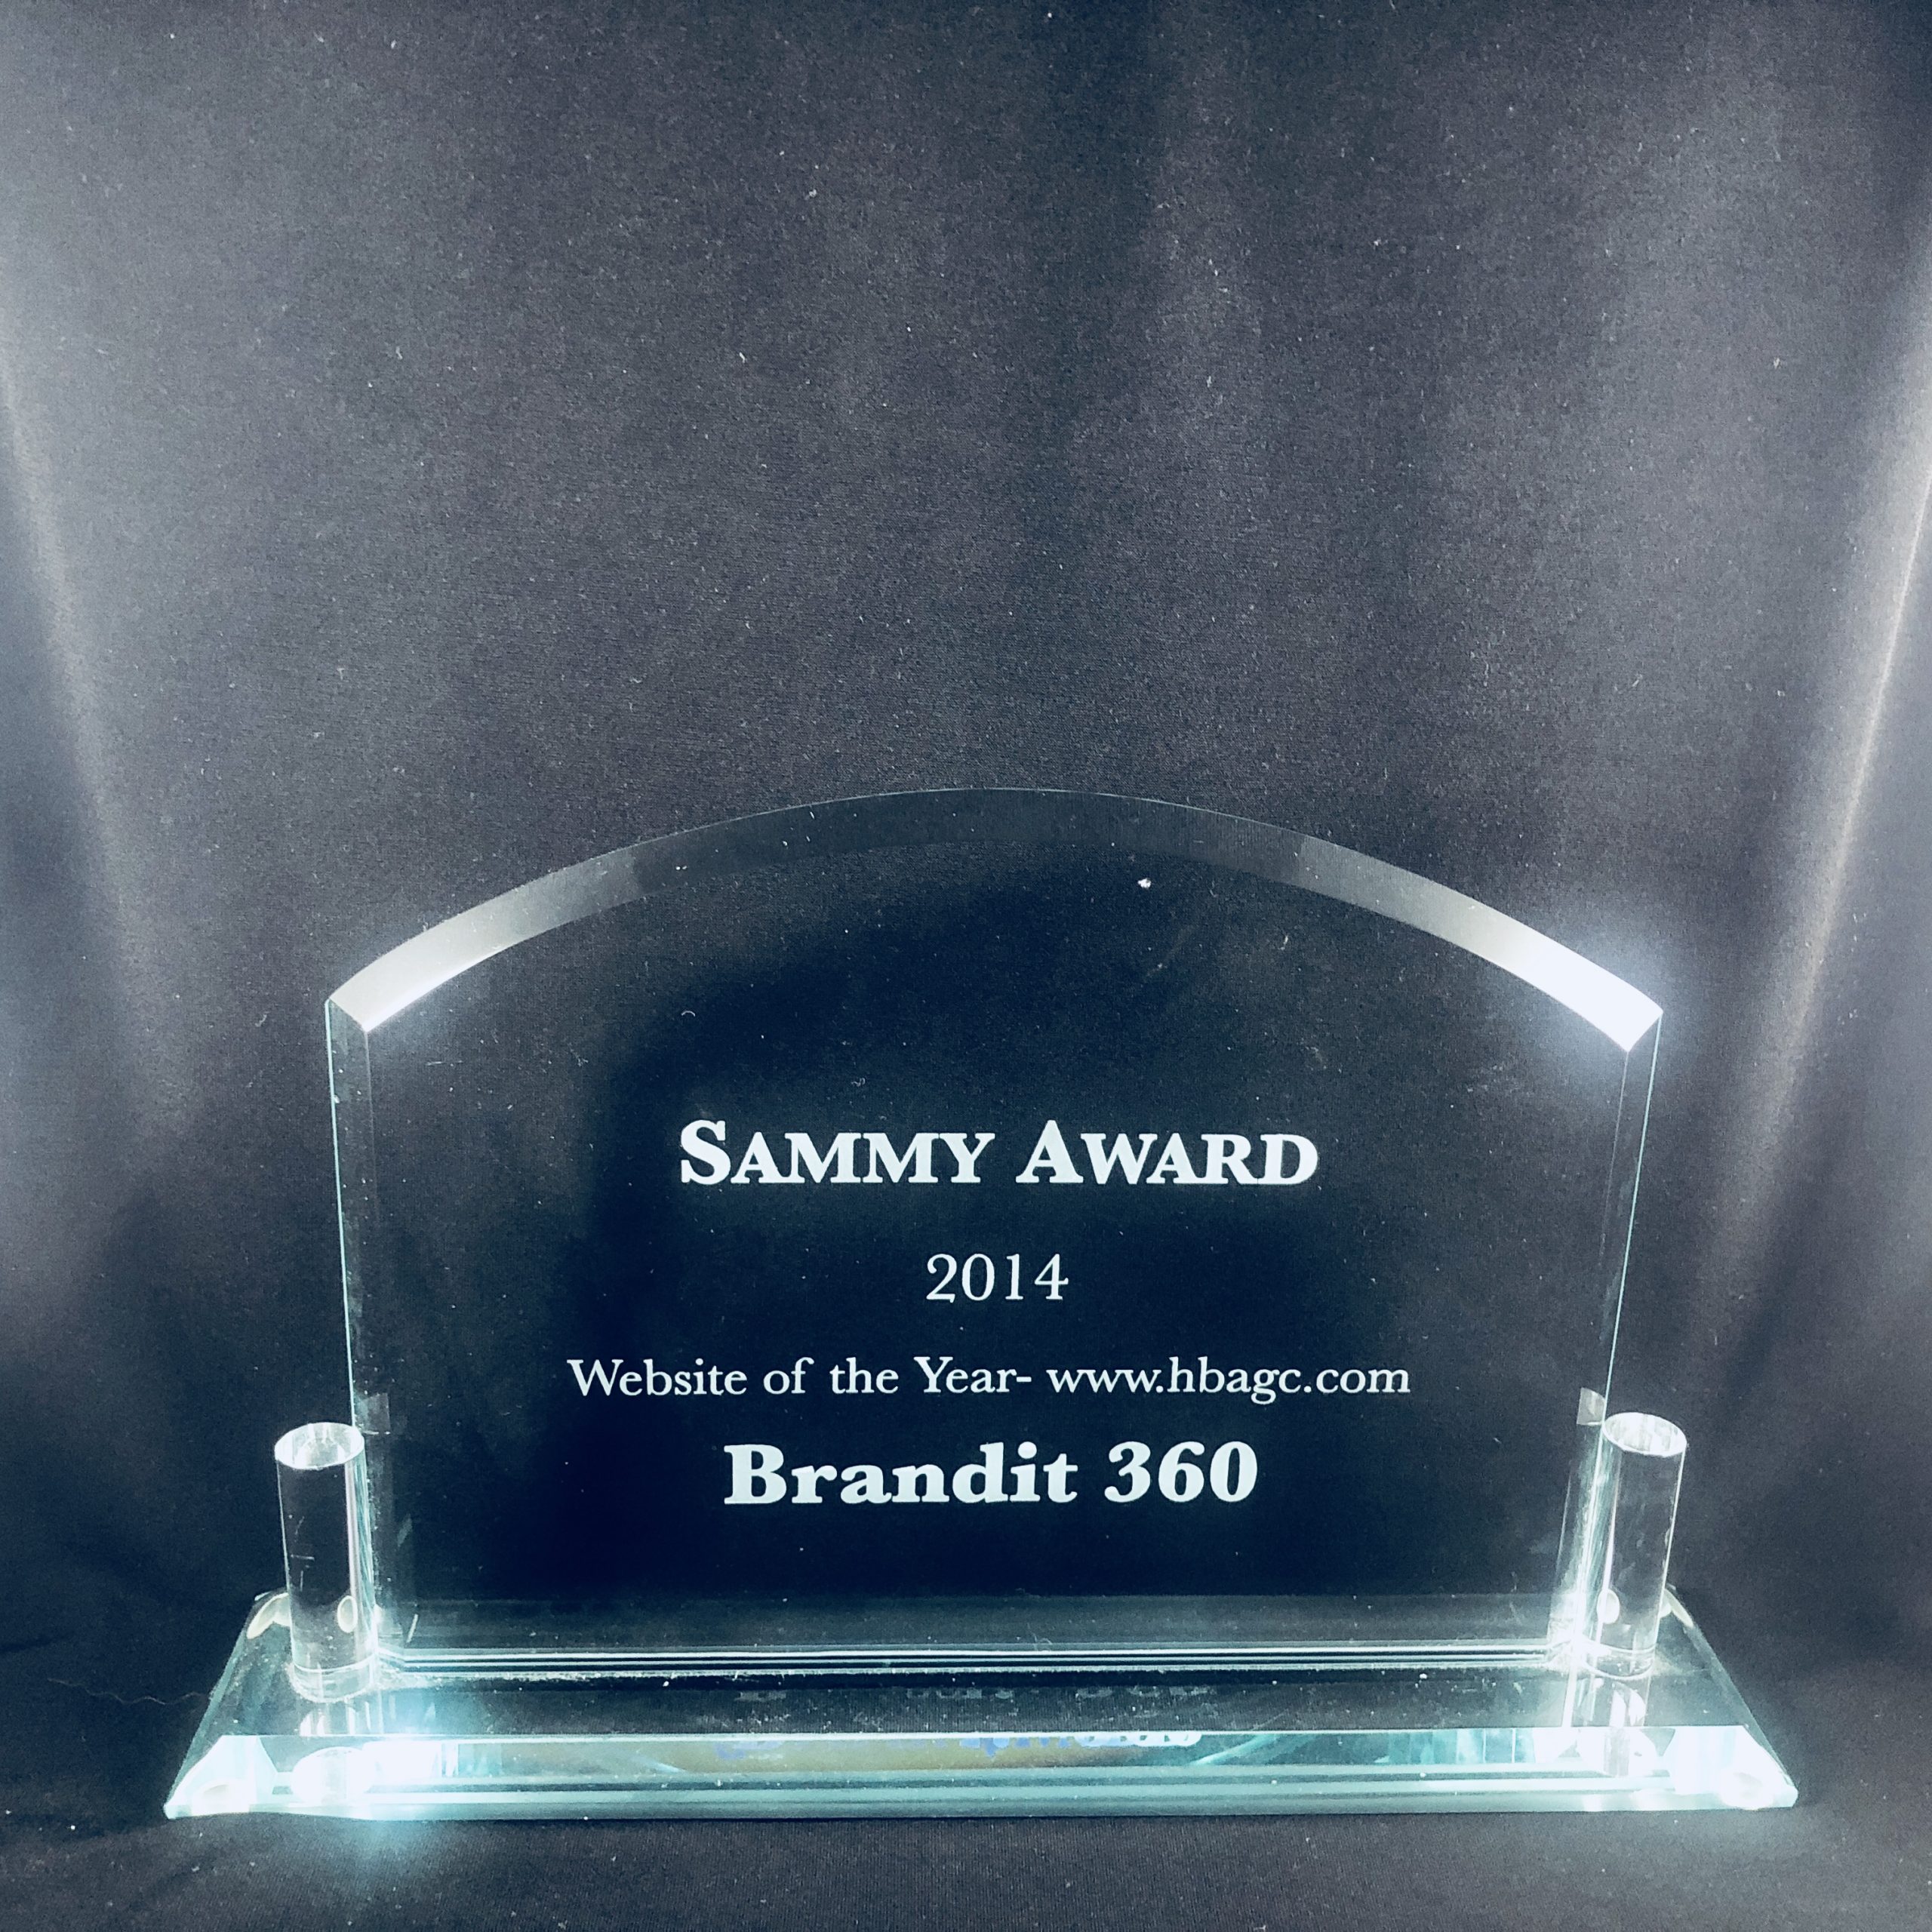 Brandit360 wins Awards from Home Builders Association of Greater Chicago